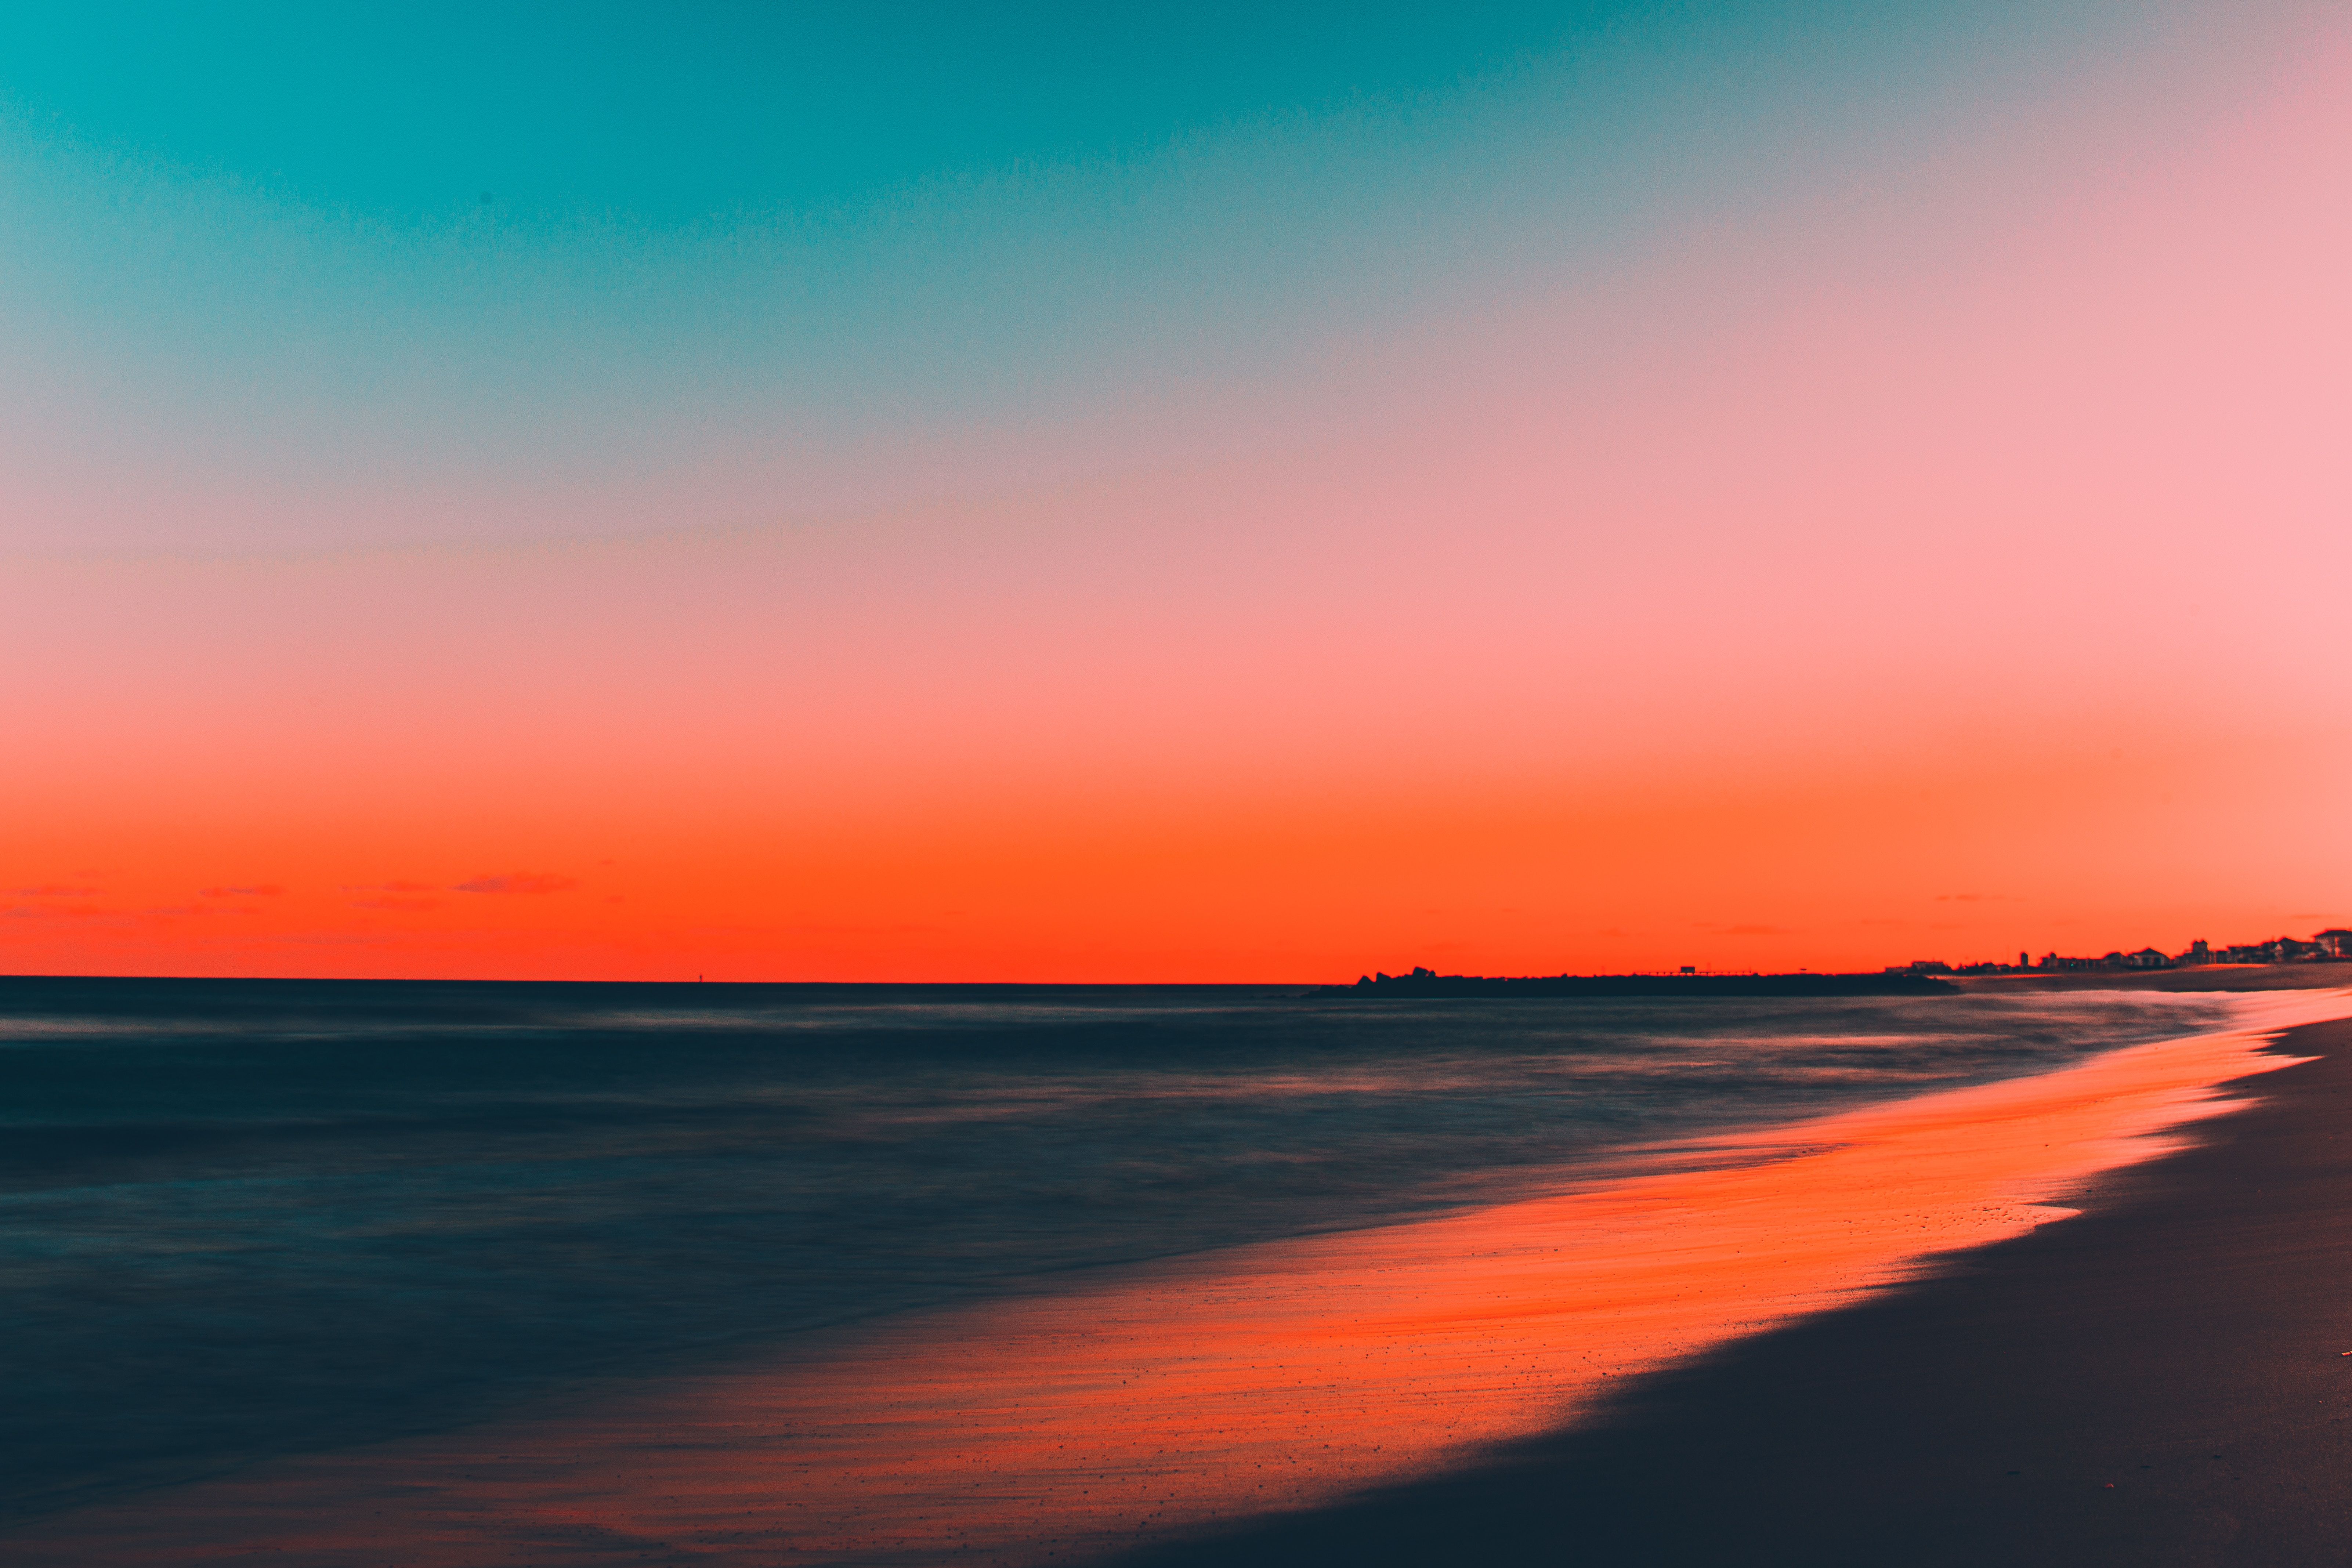 A beach at sunset with a blue and orange gradient sky. - Beach